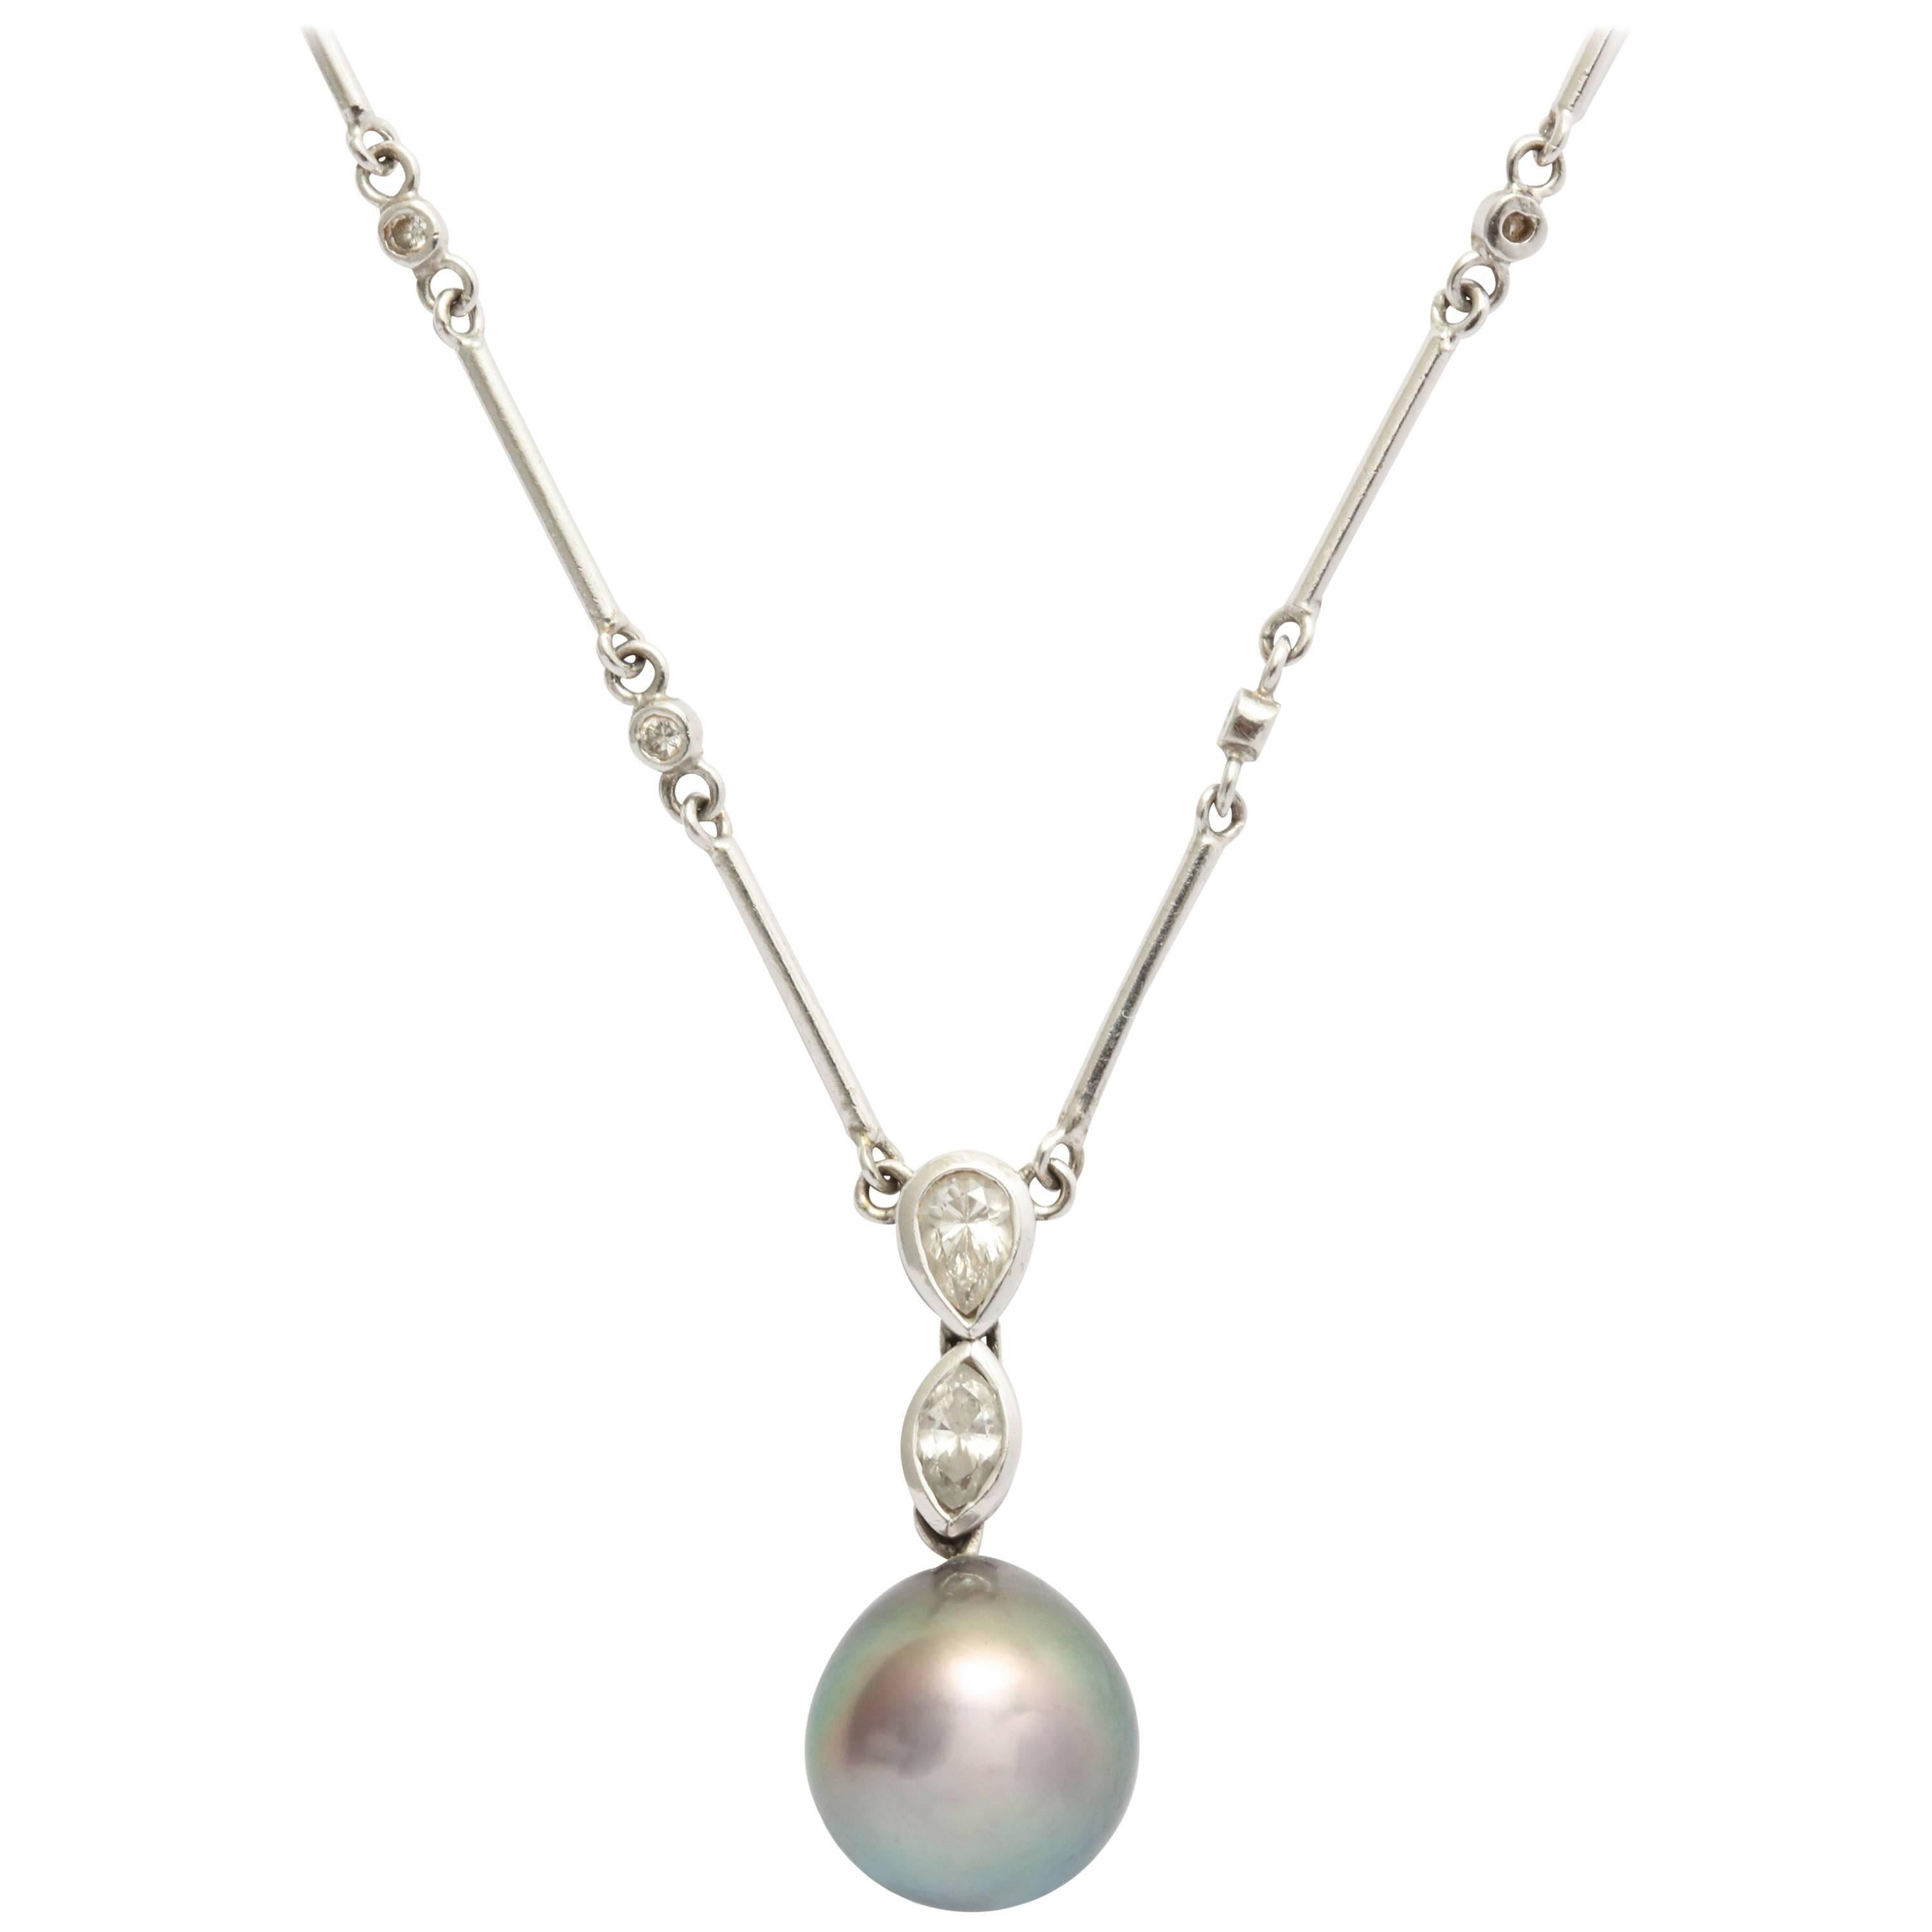 H. Stern 18 kt Tahitian South Sea Pearl Drop Necklace